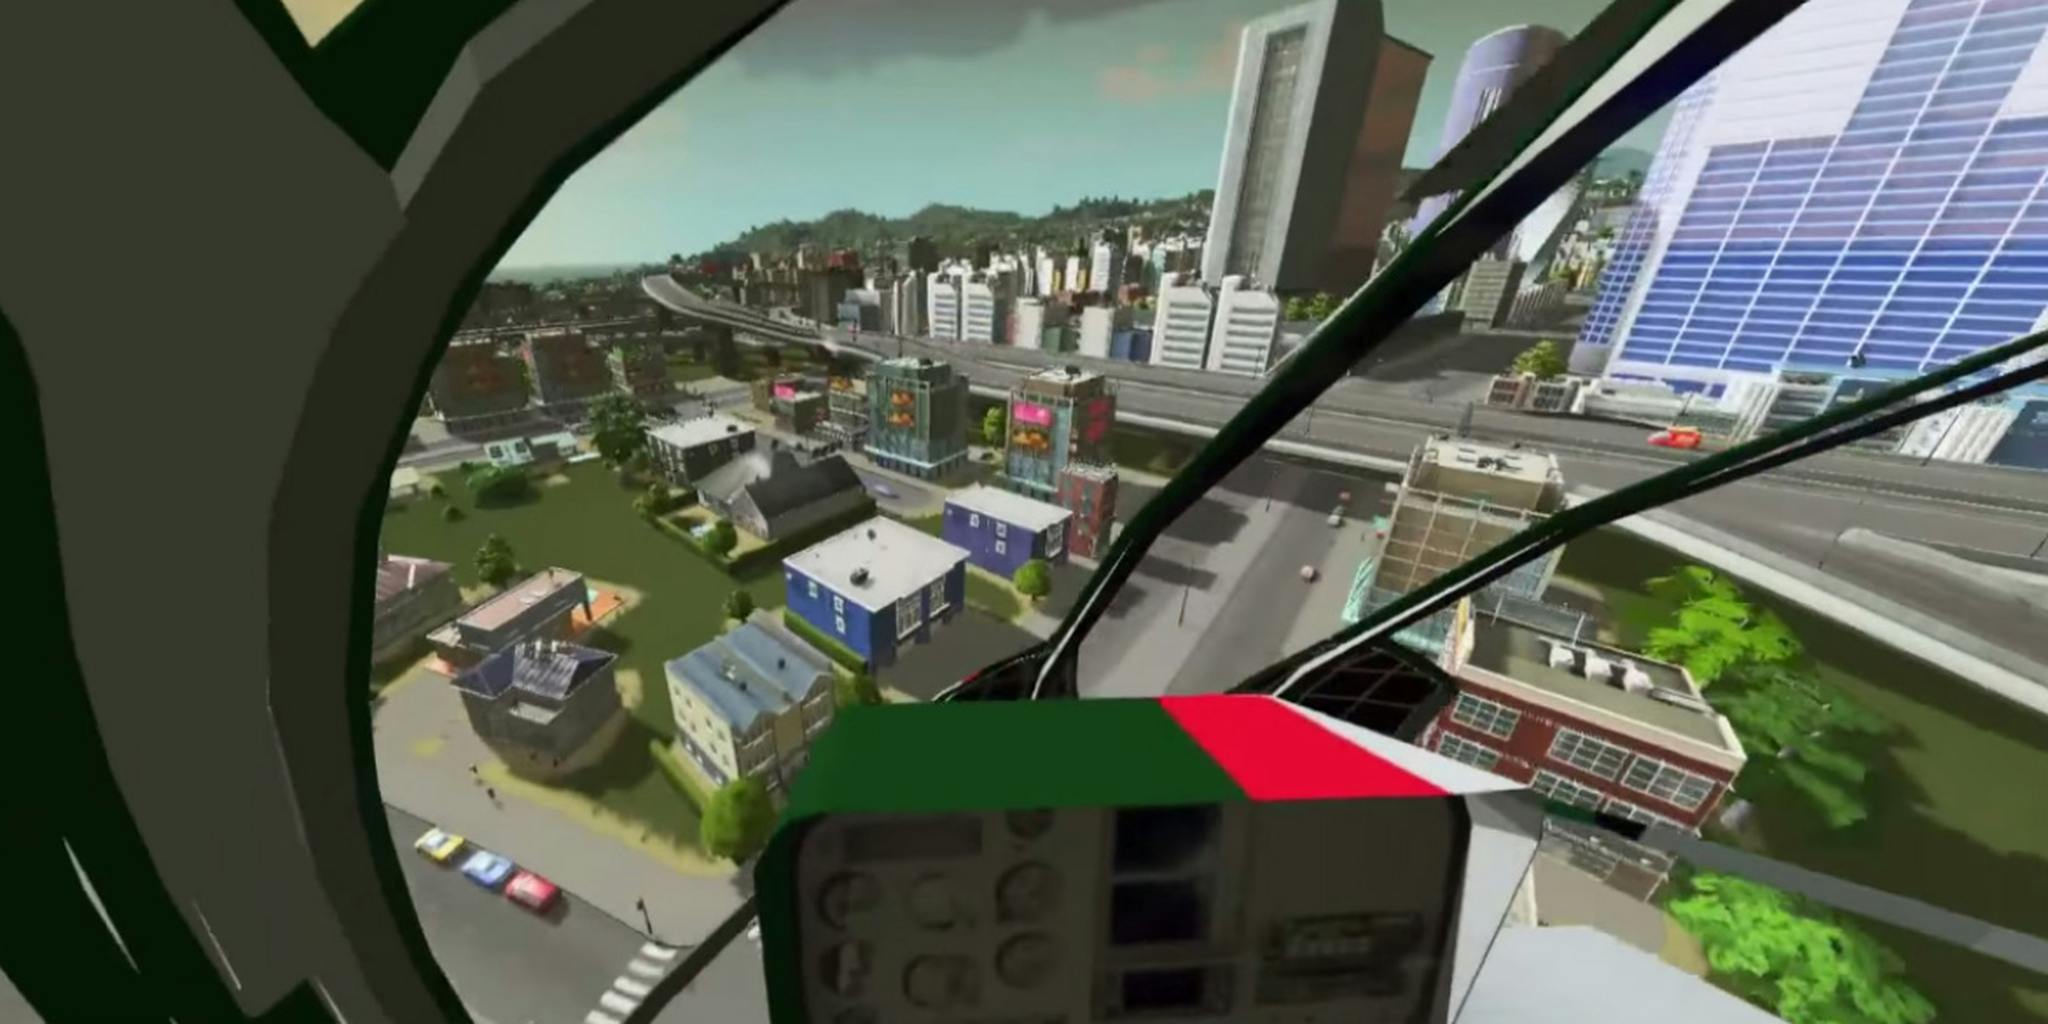 Helicopter Mod Is Giving Us Lovely Views Of Cities Skylines The Daily Dot